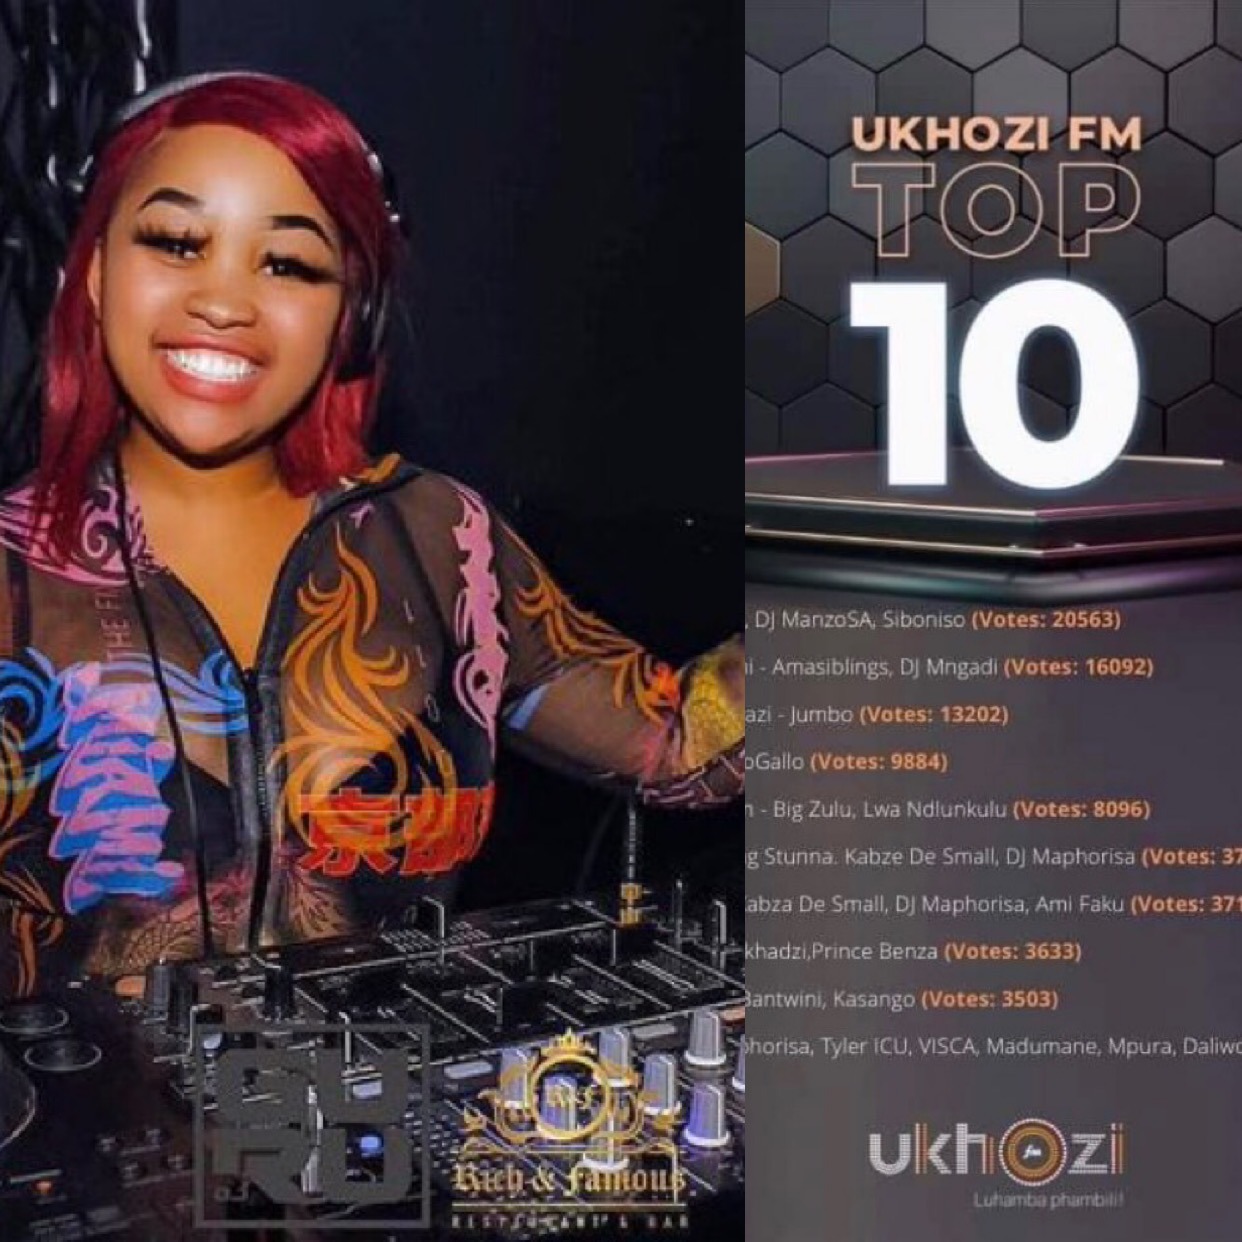 Ukhozi FM called a corrupt station after their song of the year 12